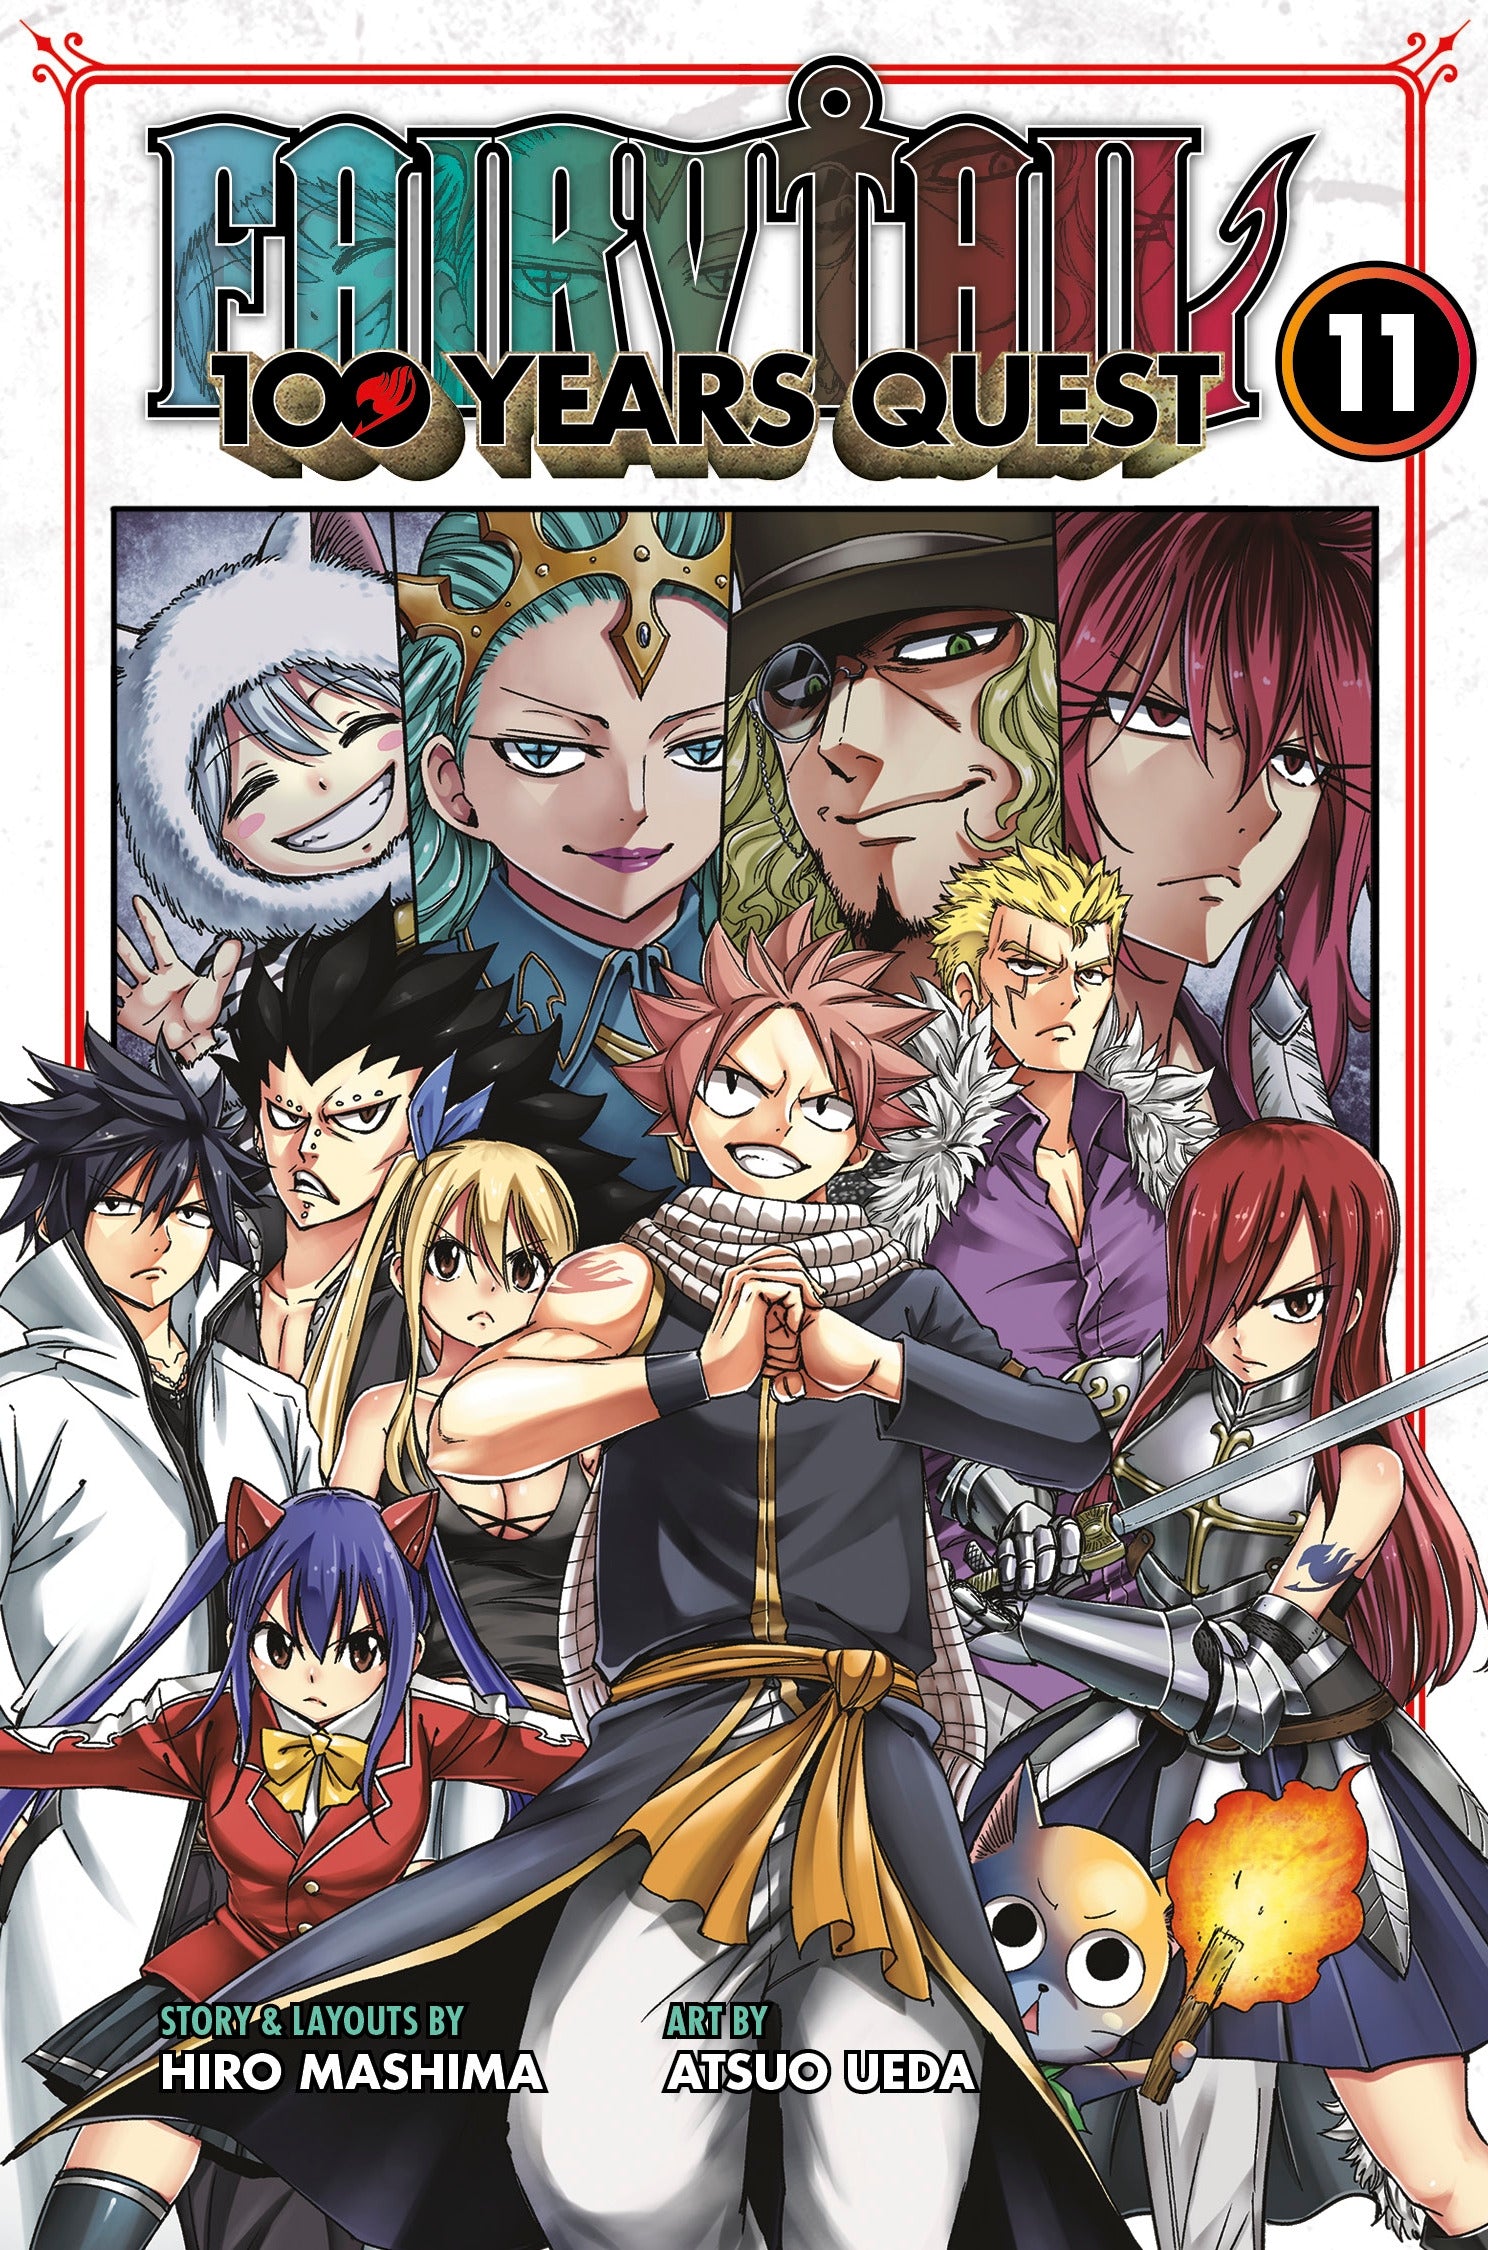 FAIRY TAIL 100 Years Quest, Vol. 11